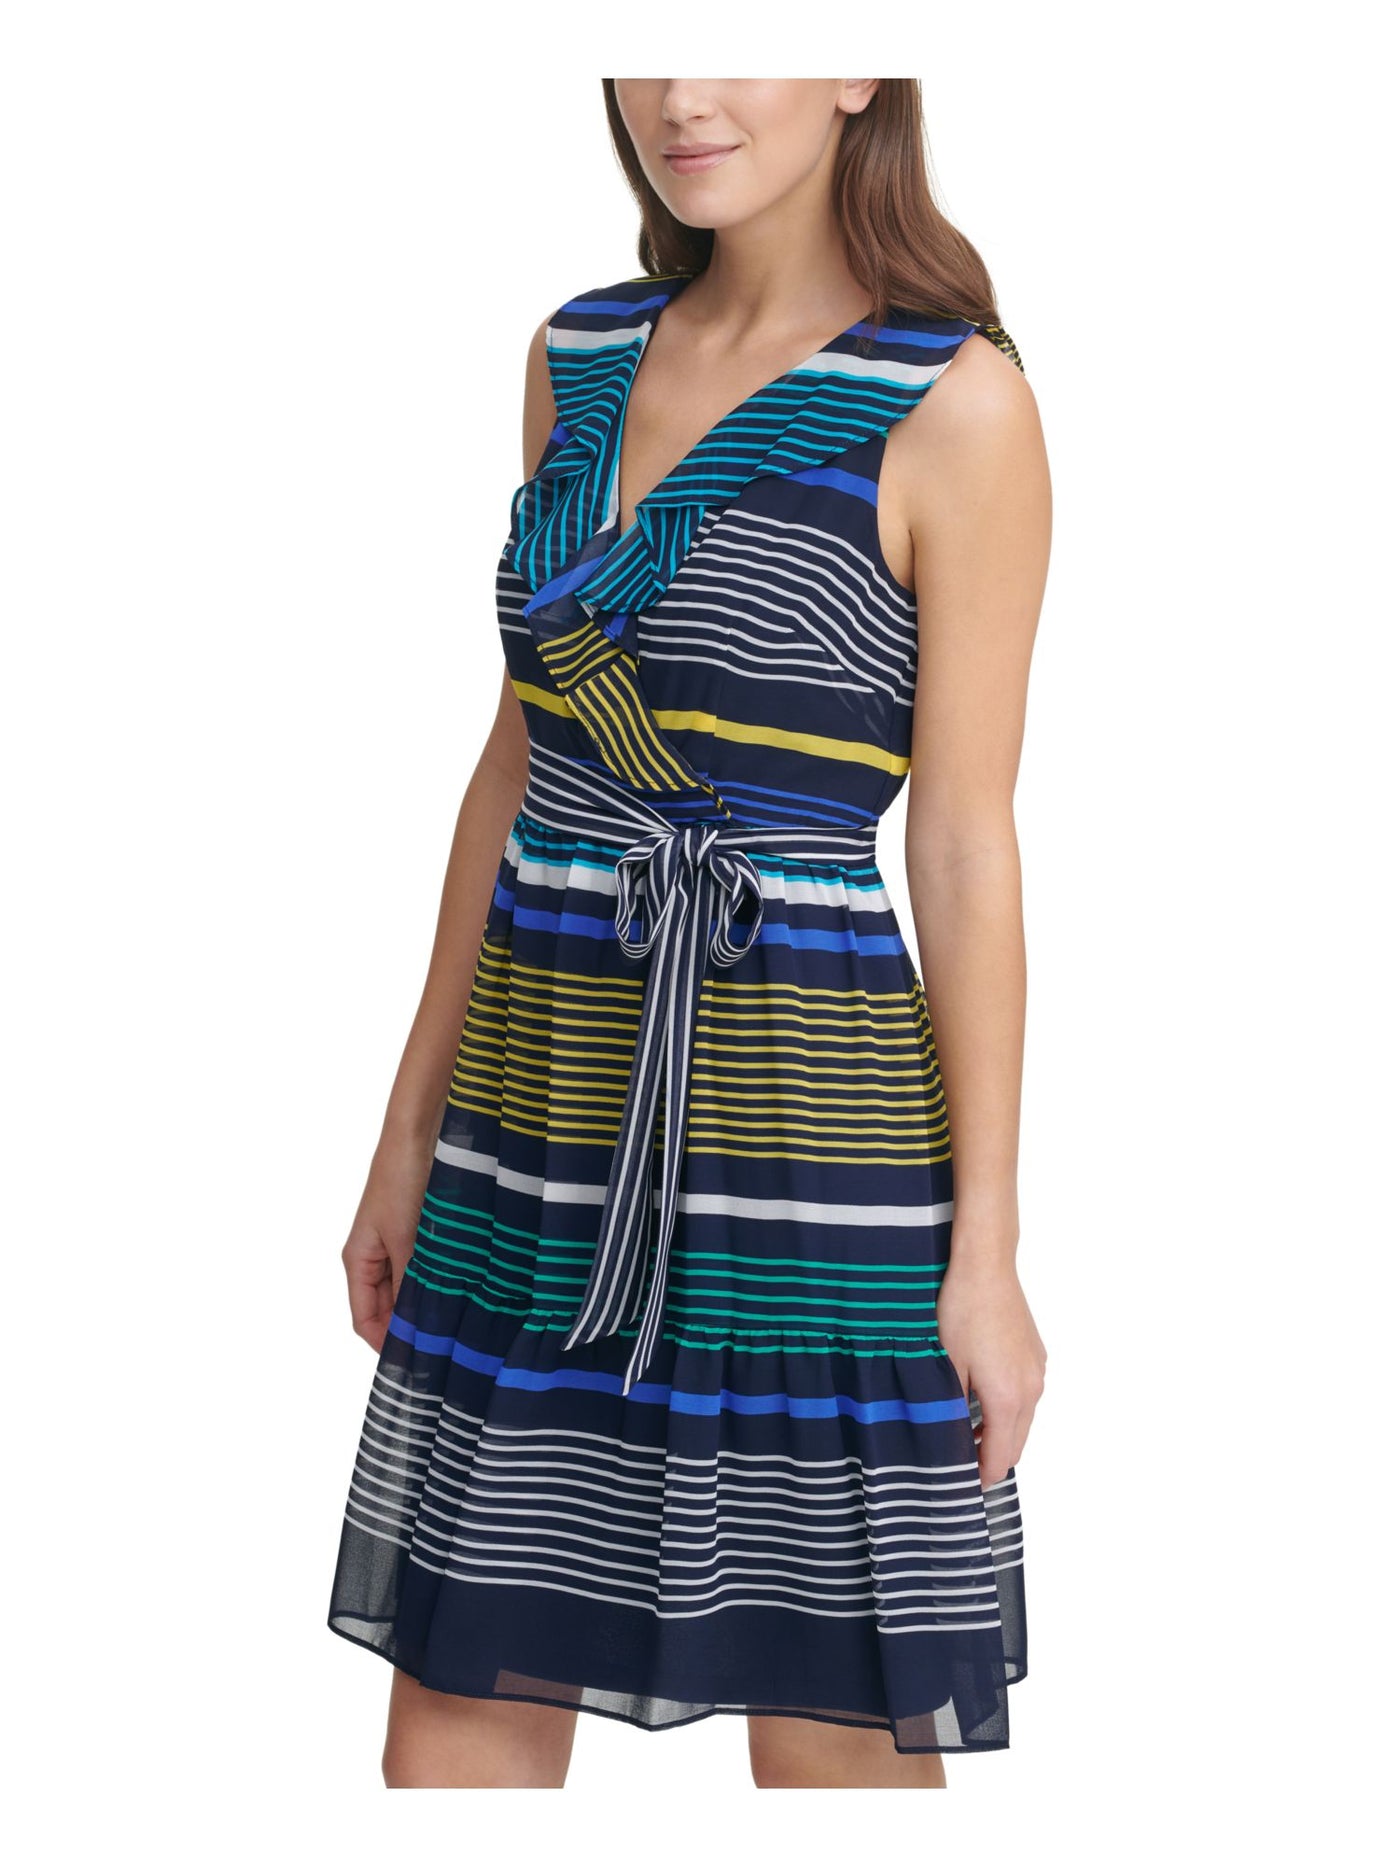 DKNY Womens Navy Ruffled Zippered Belted Lined Striped Sleeveless Surplice Neckline Above The Knee Wear To Work Fit + Flare Dress 12